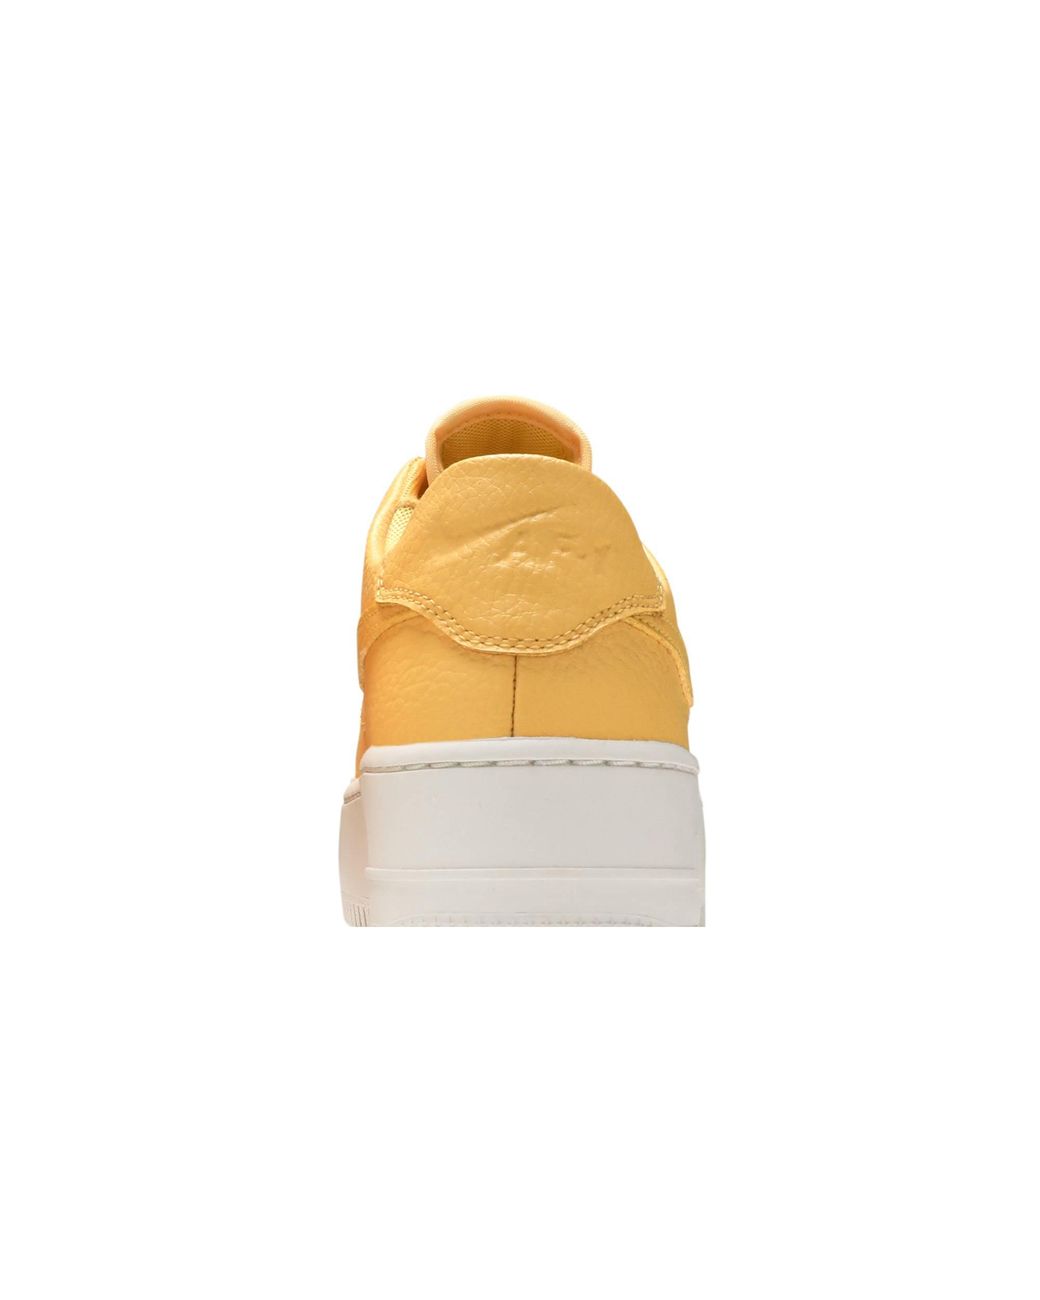 Veeg terrorisme links Nike Air Force 1 Sage Low 'topaz Gold' in Yellow | Lyst